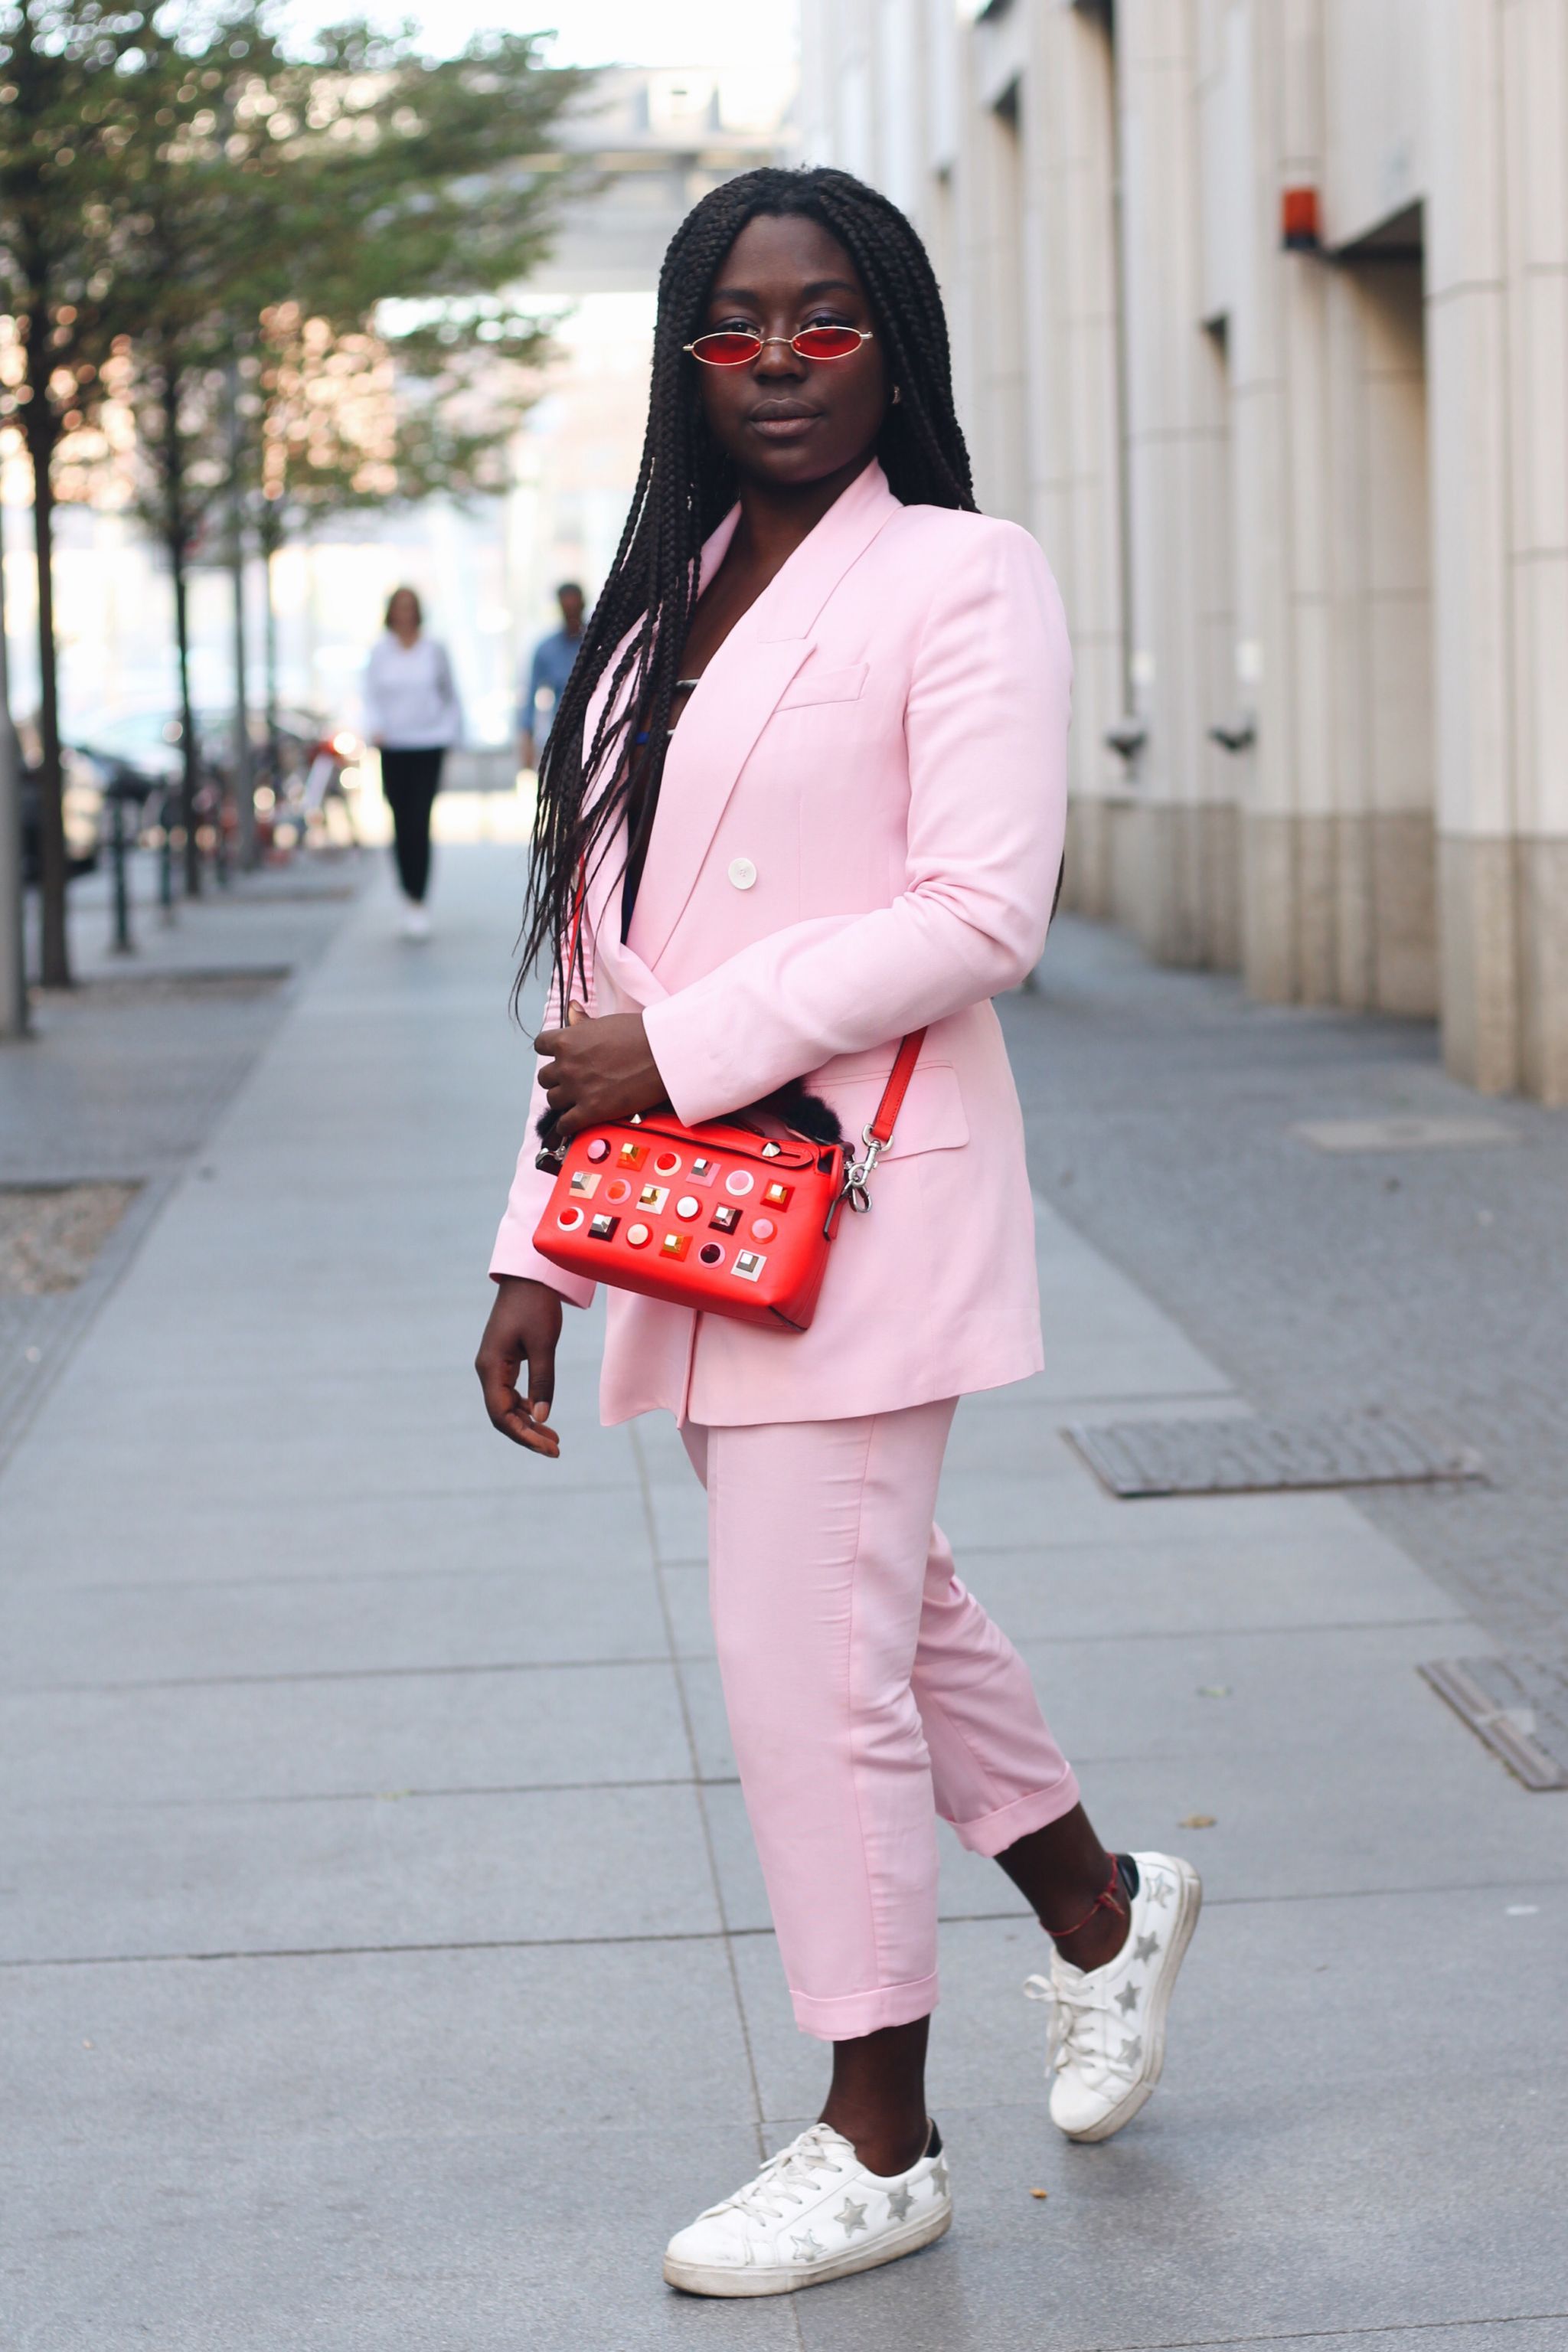 BERLIN FASHION WEEK DAY 1 - FENDI, PINK SUIT - L is for Lois